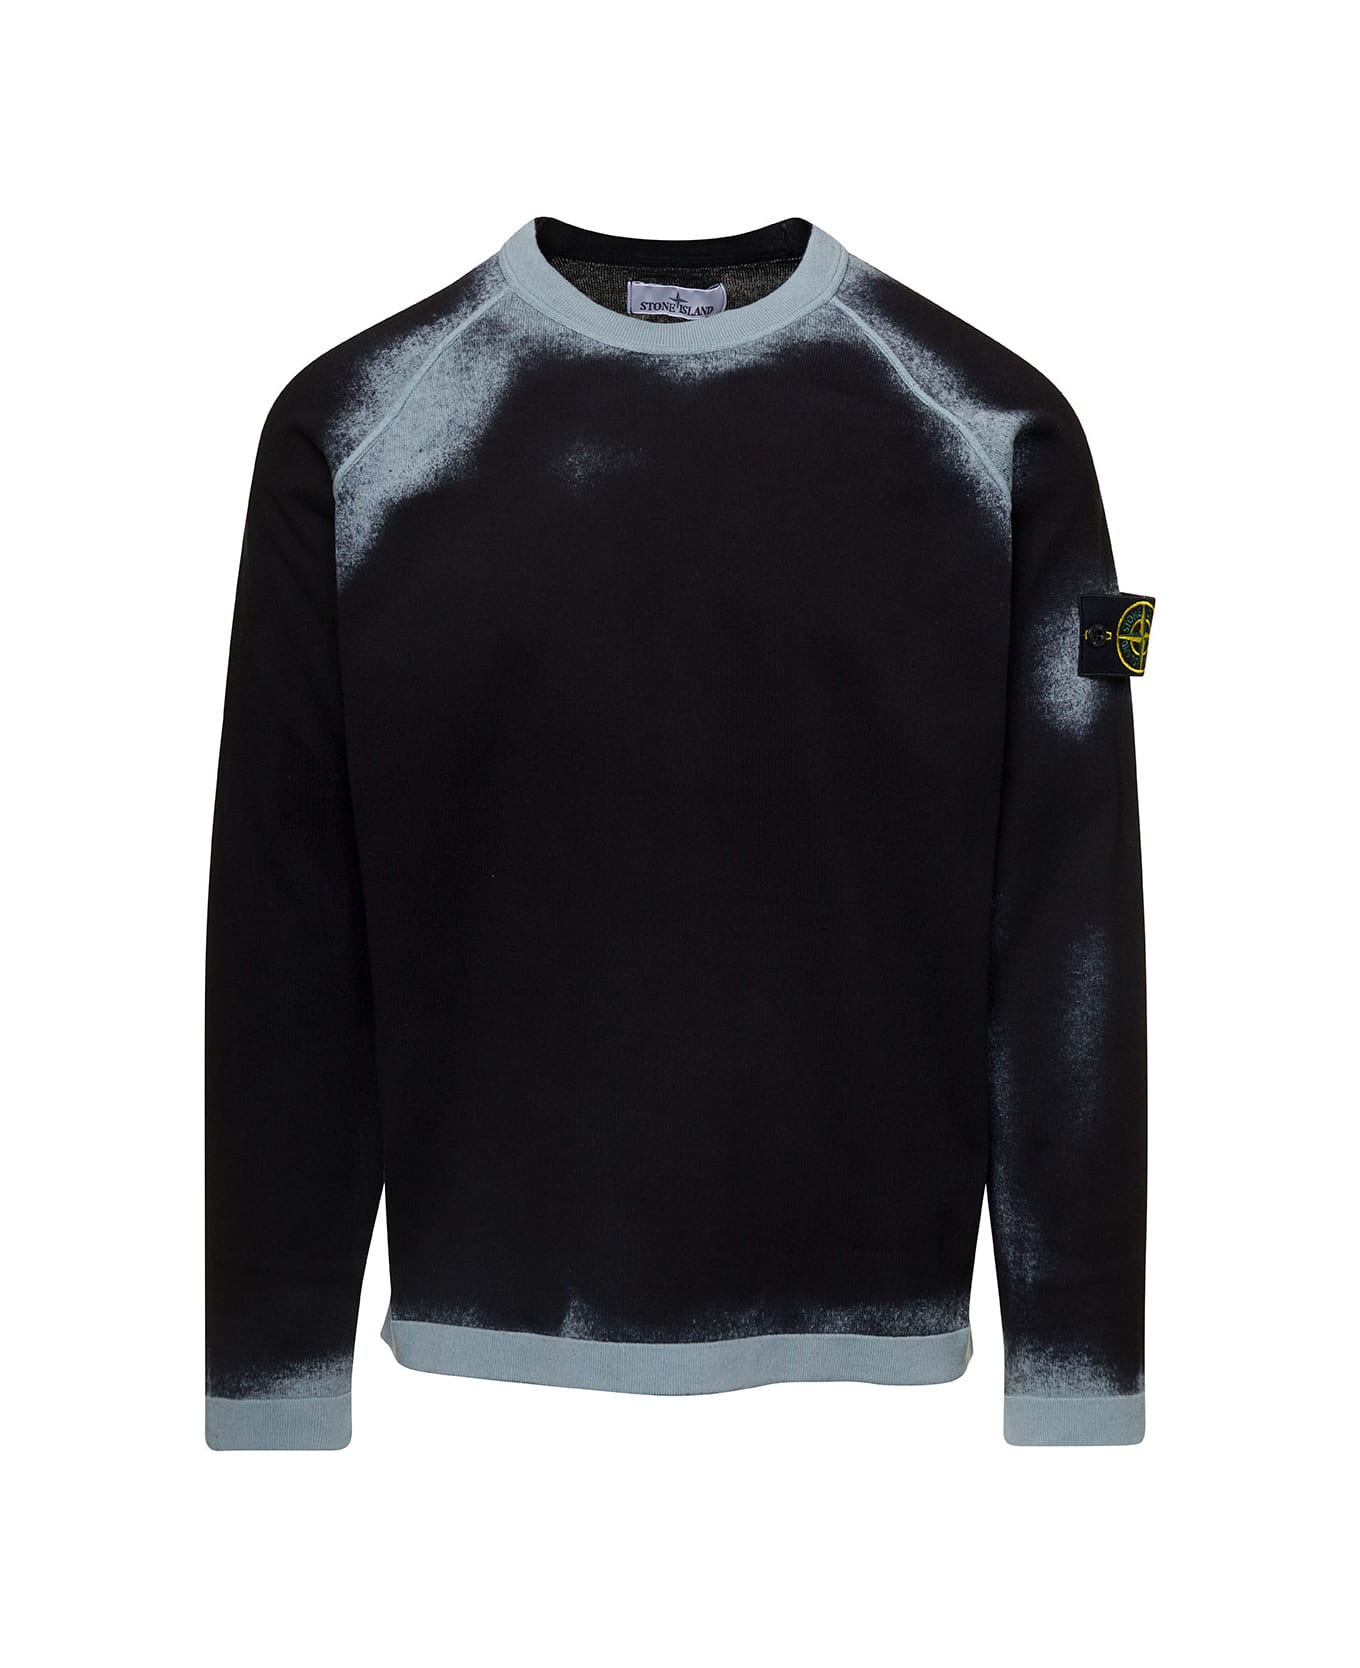 Stone Island Black Crewneck Sweatshirt With Logo Patch And Fade Effect In Cotton Man - Black